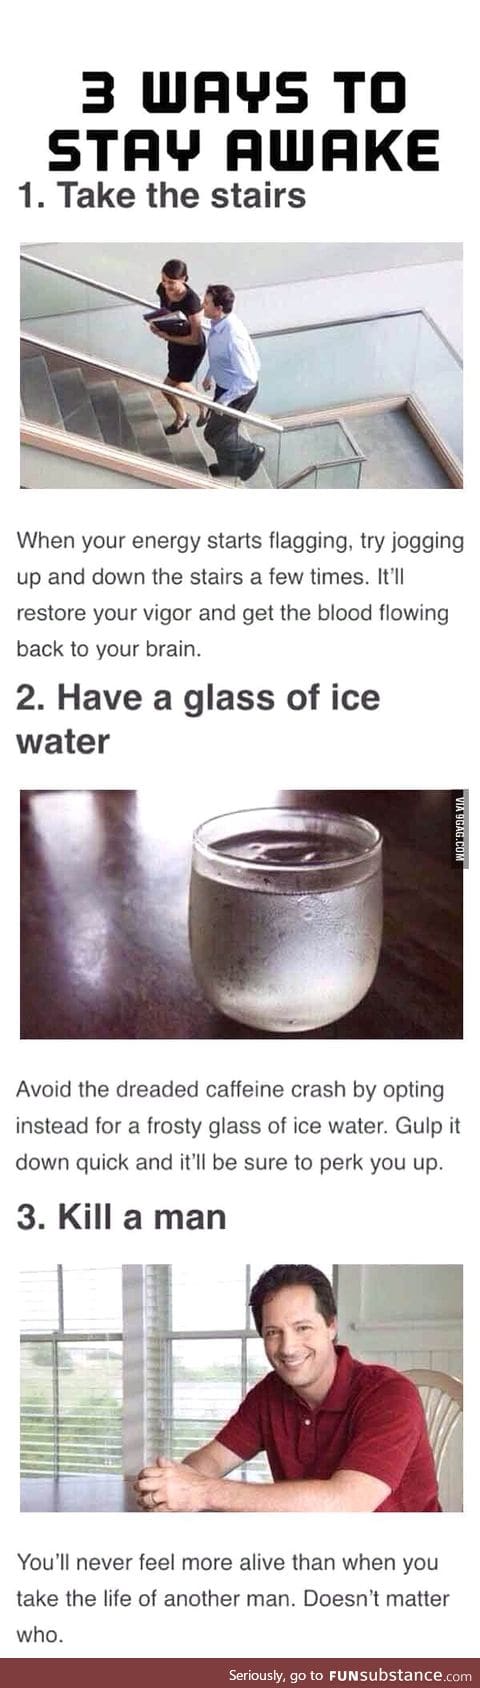 3 ways to stay cool